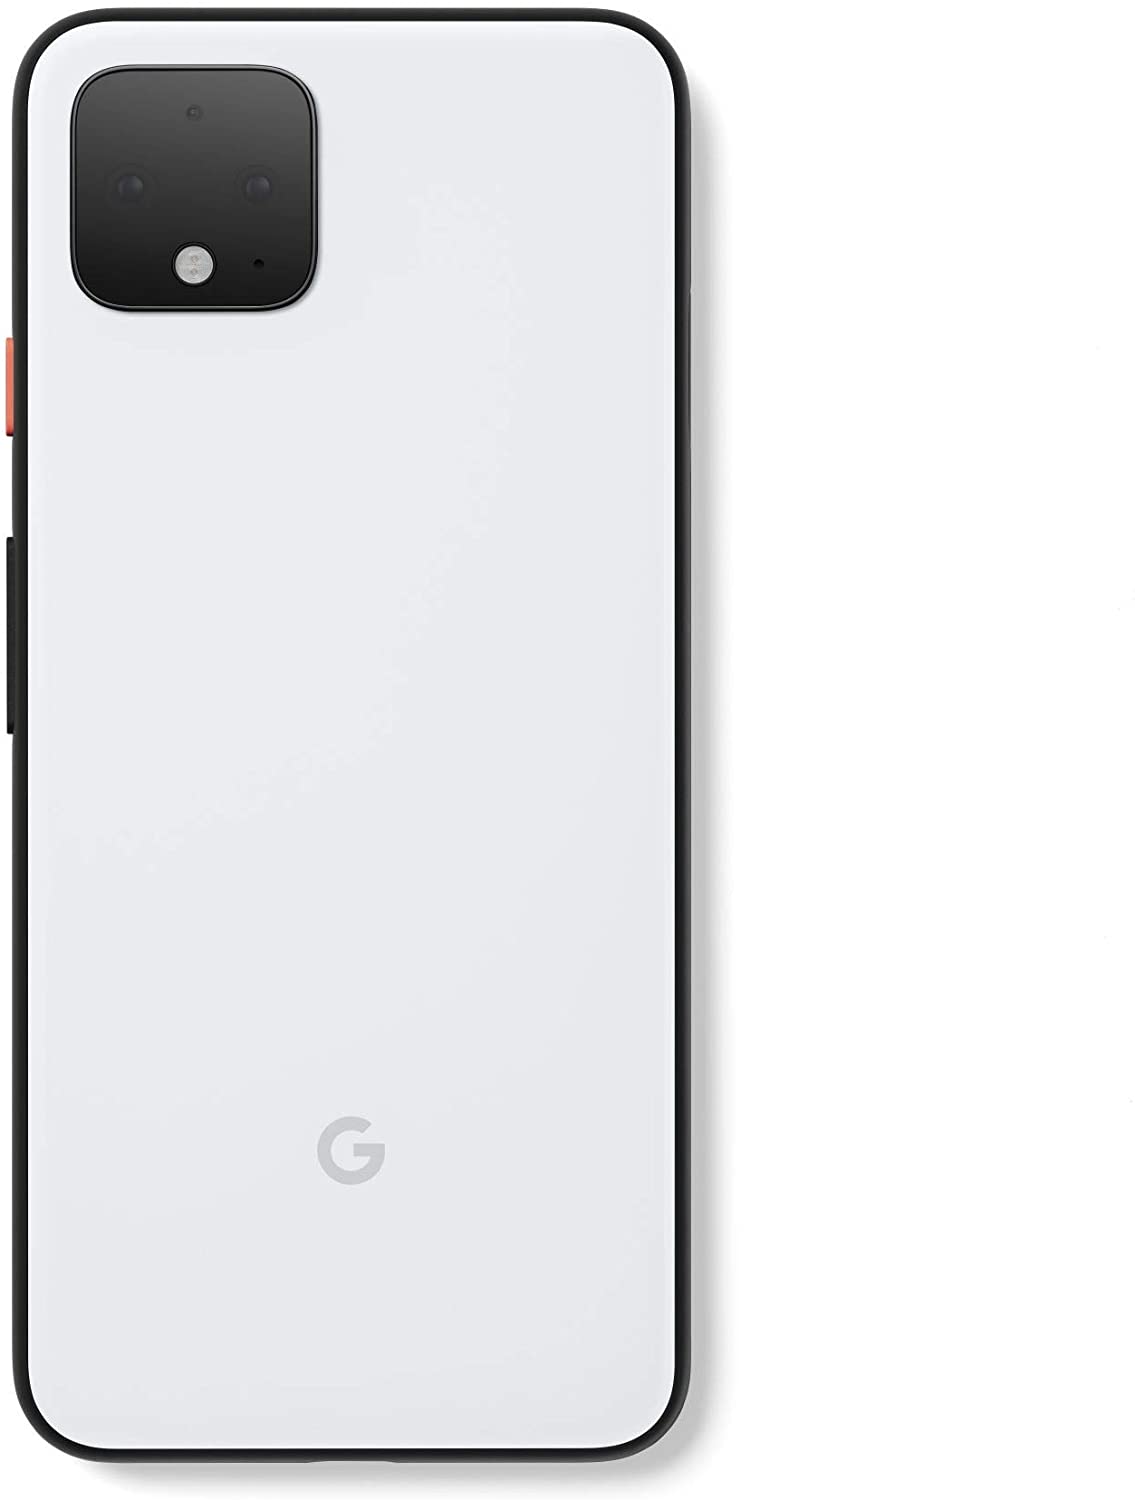 Google Pixel 4 XL  Clearly White(白)  64G